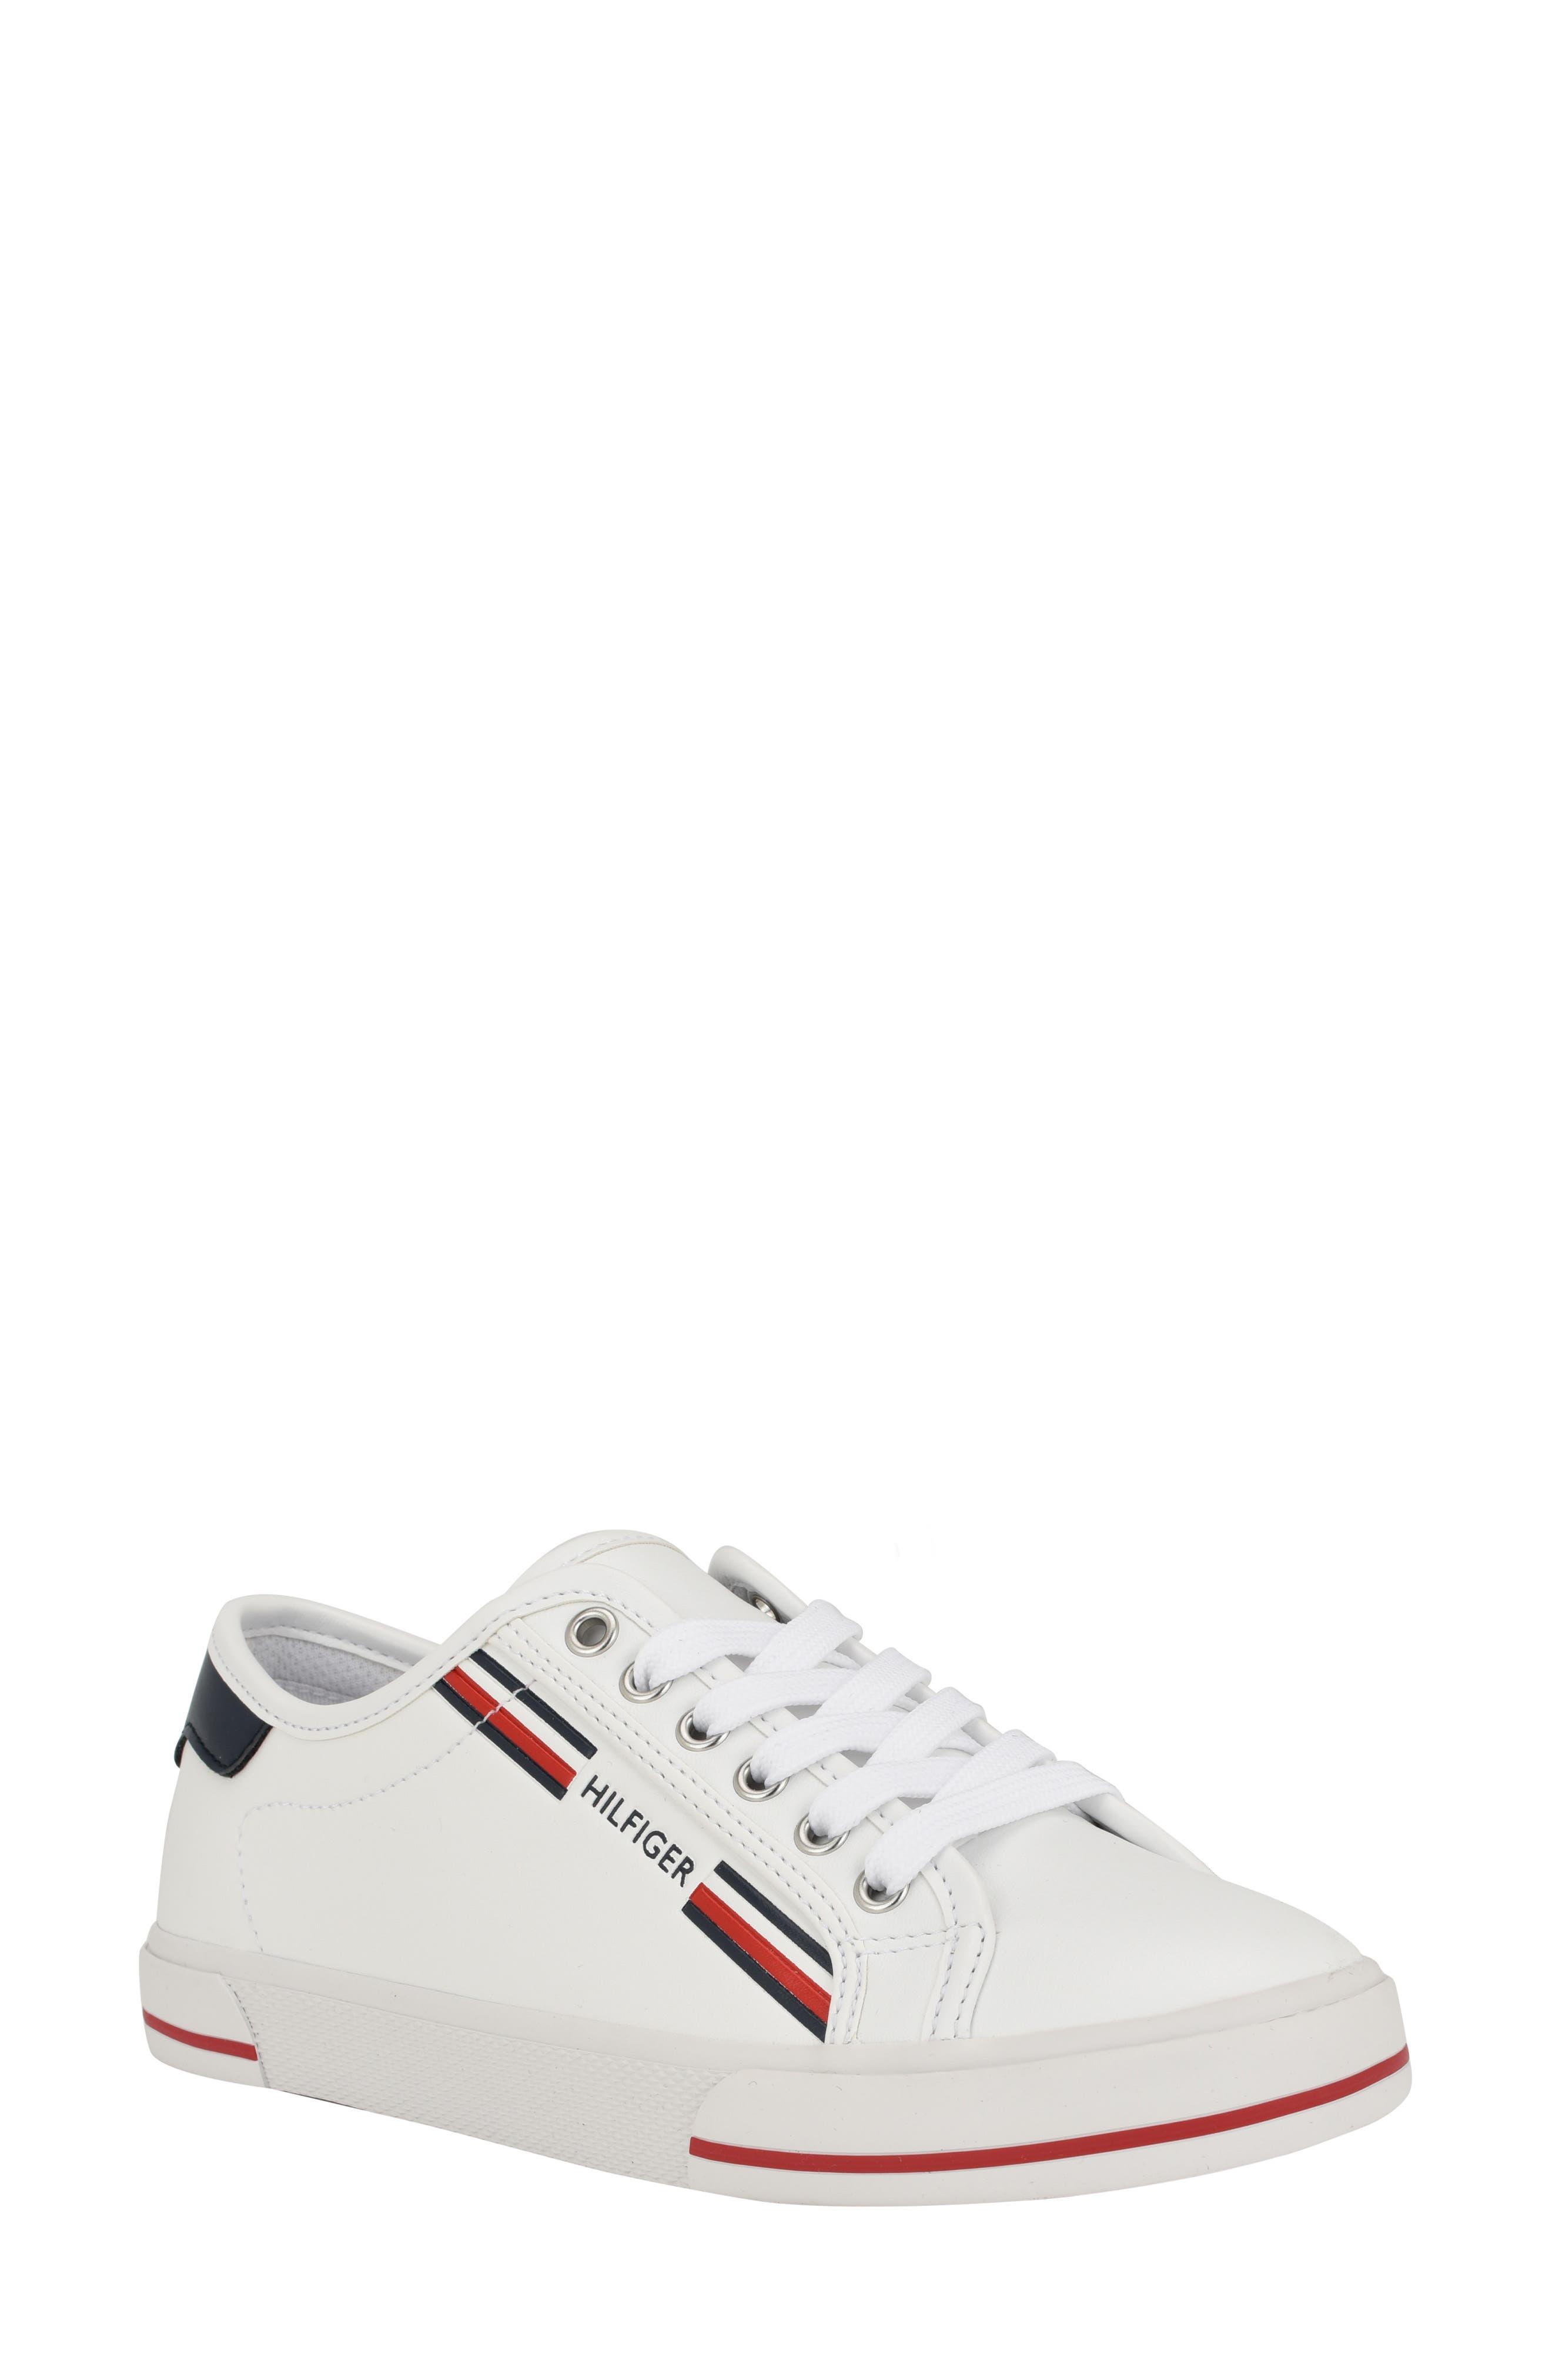 Tommy Hilfiger Low Top Sneaker in White